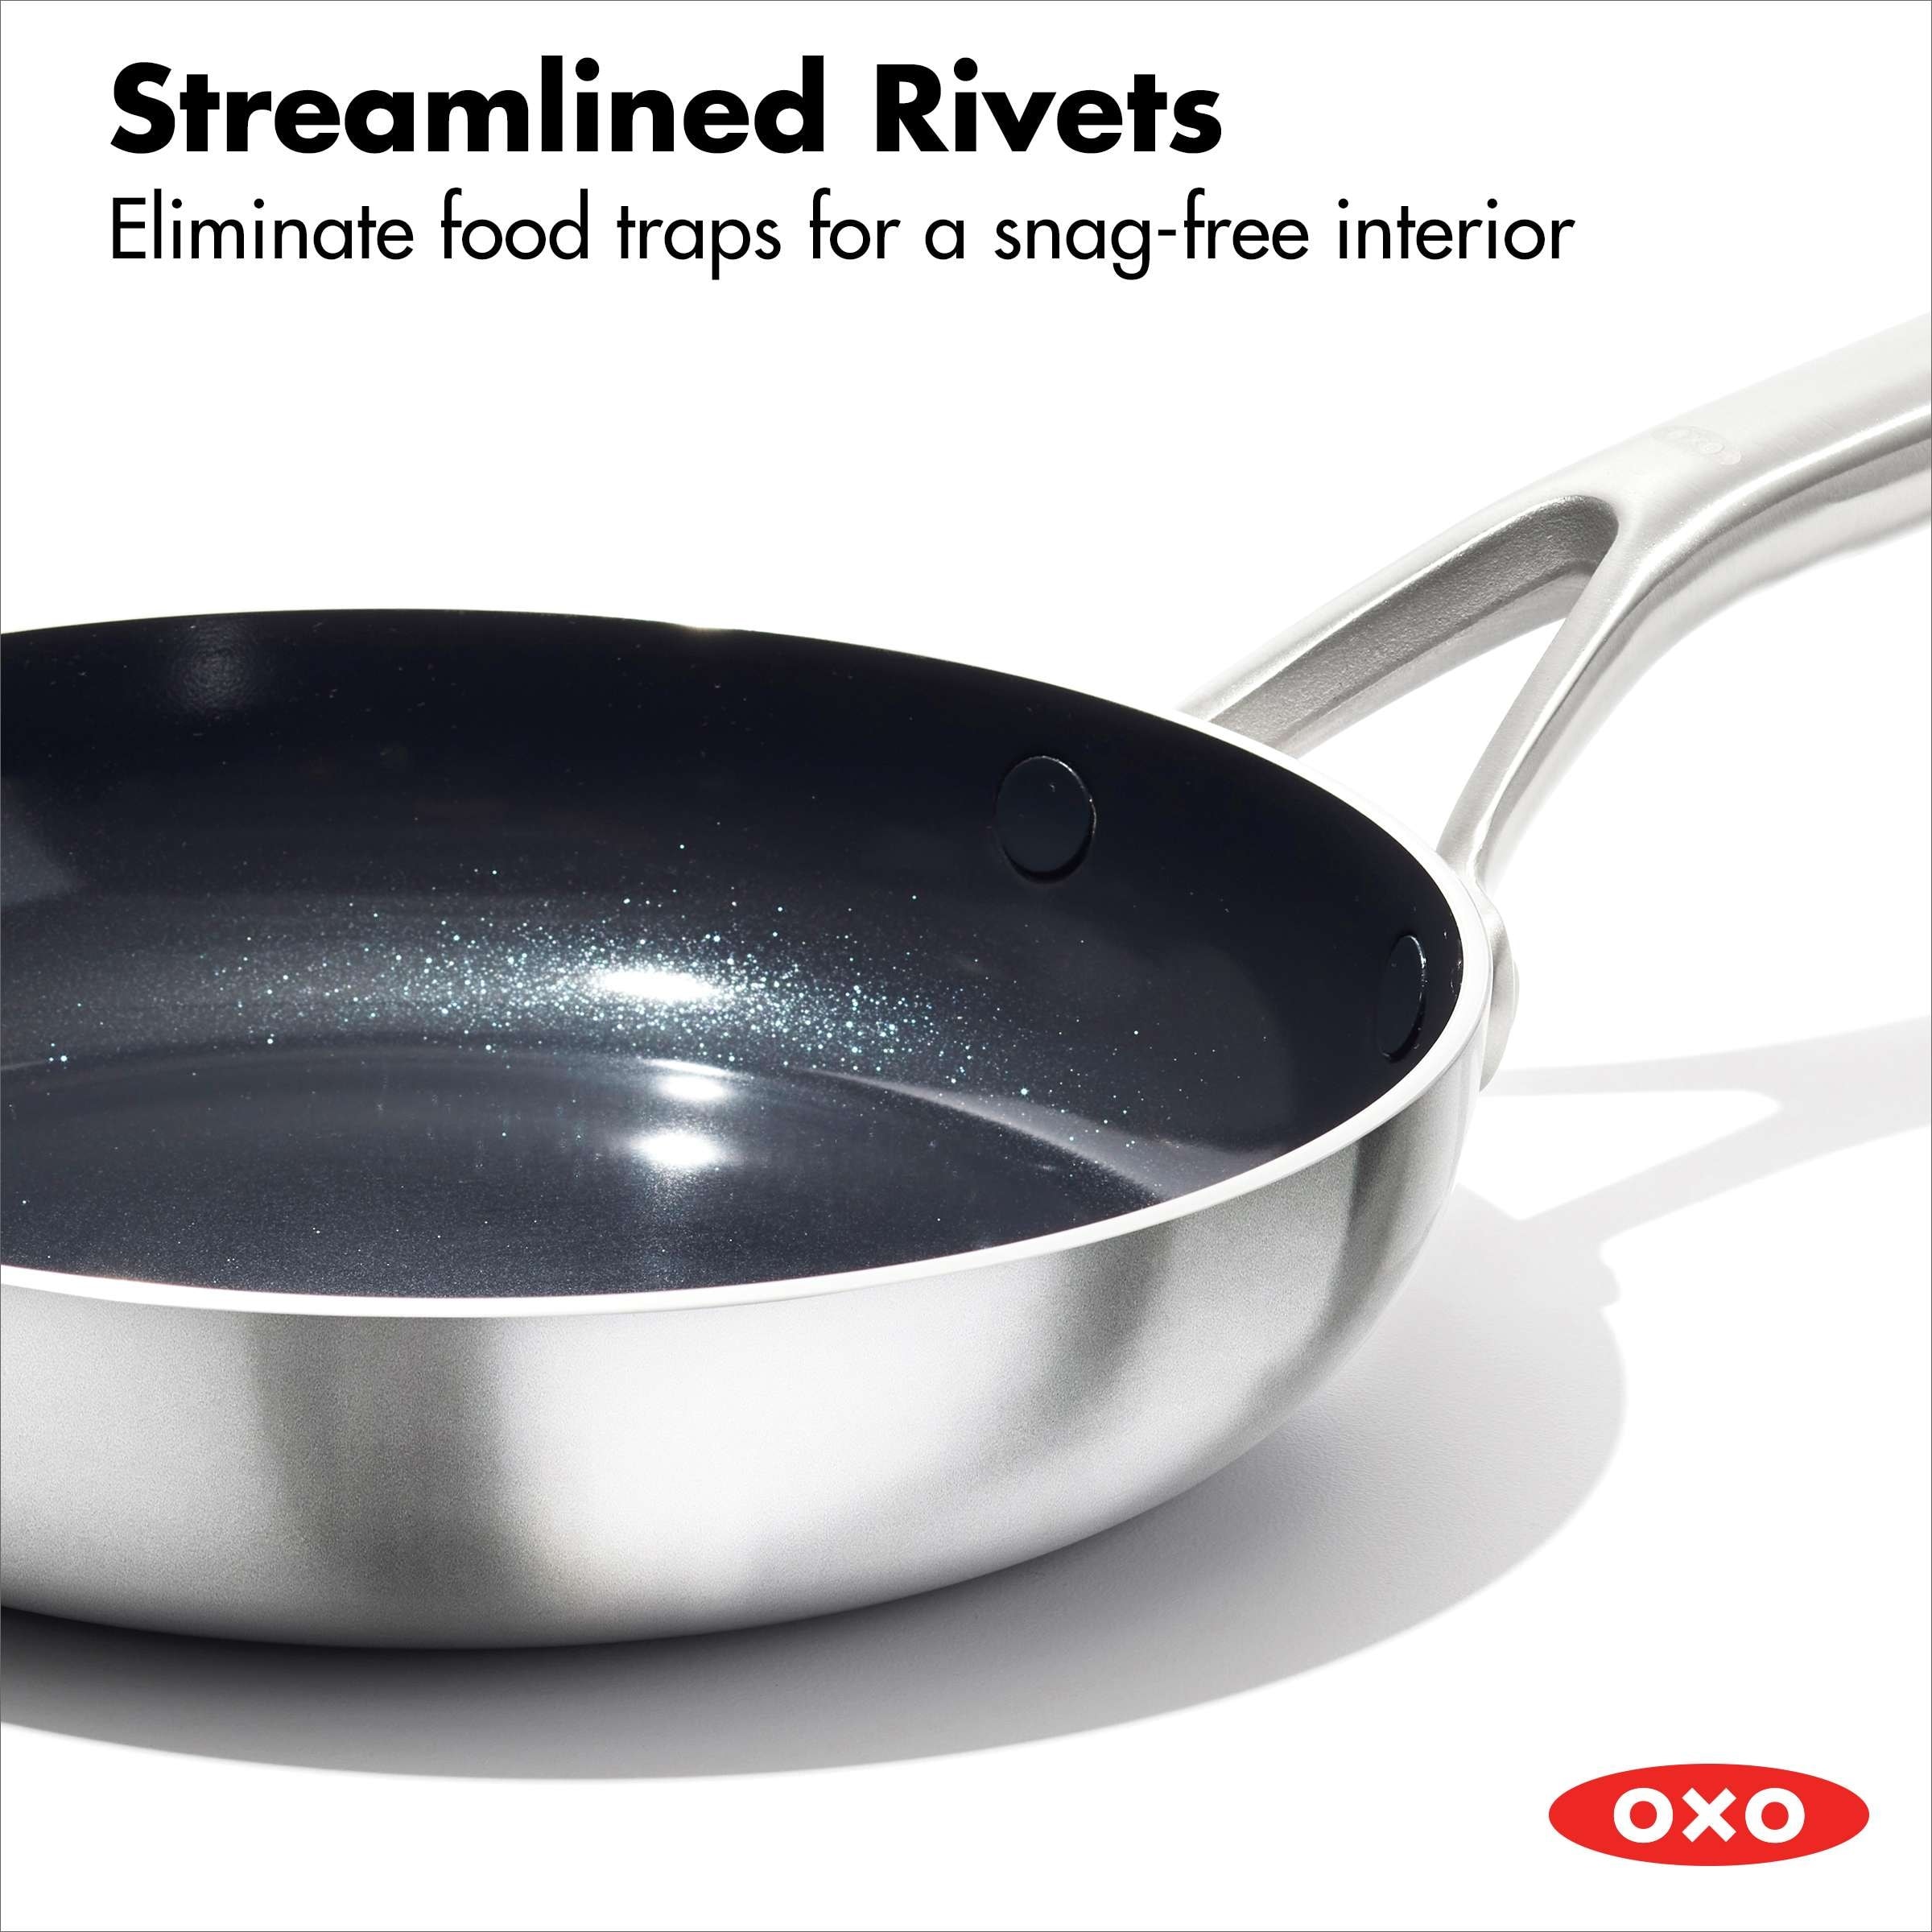 https://ak1.ostkcdn.com/images/products/is/images/direct/5e051fb712a5c77cf3cb175c815f63c1df5cec86/OXO-Mira-3-Ply-Stainless-Steel-Non-Stick-Frying-Pan%2C-12%22.jpg